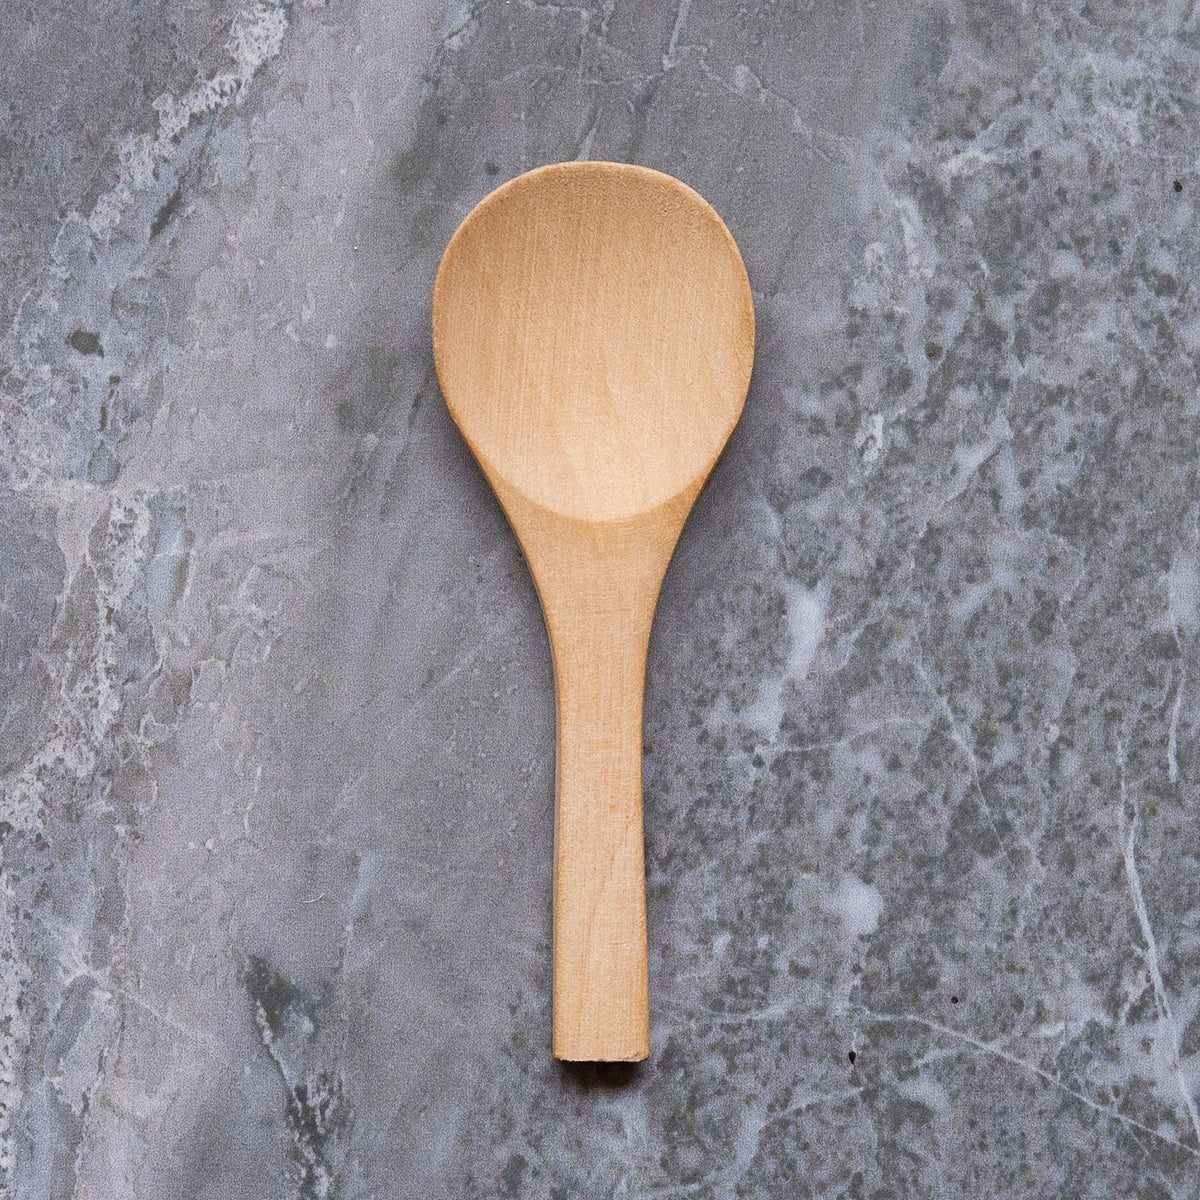 wooden body scrub spoon on grey marble surface